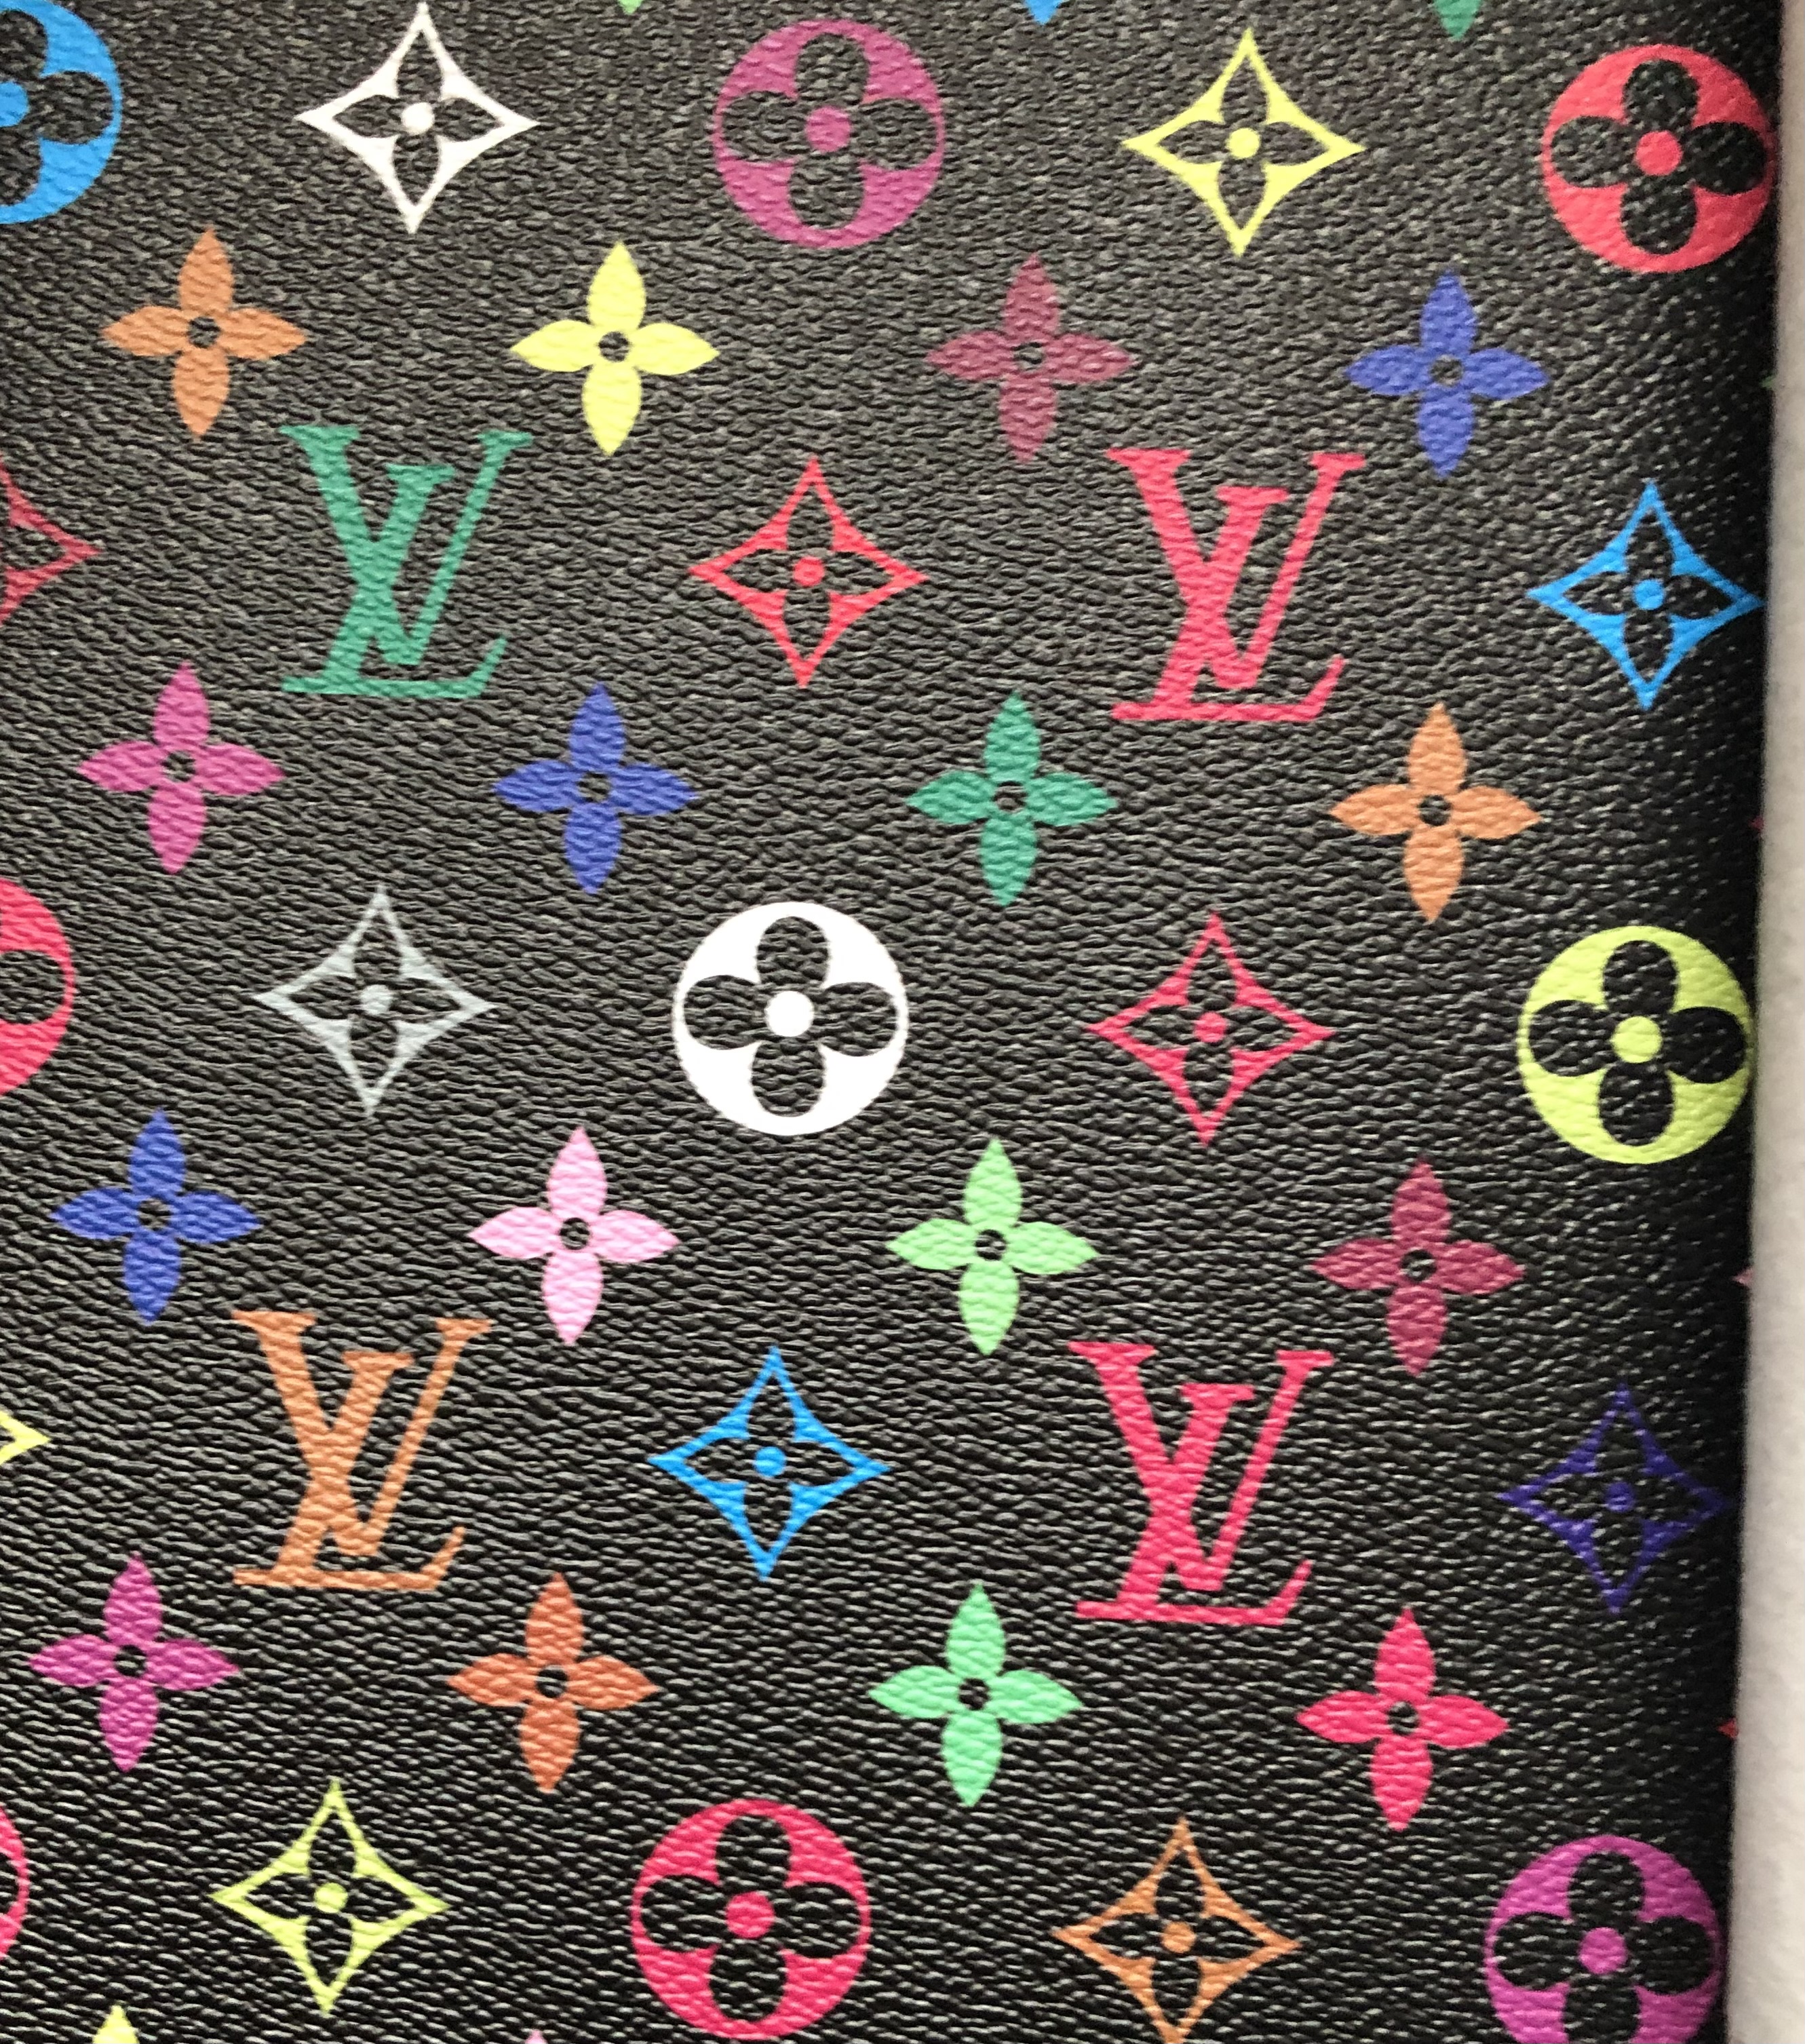 Louis Vuitton Pvc Material By The Yard